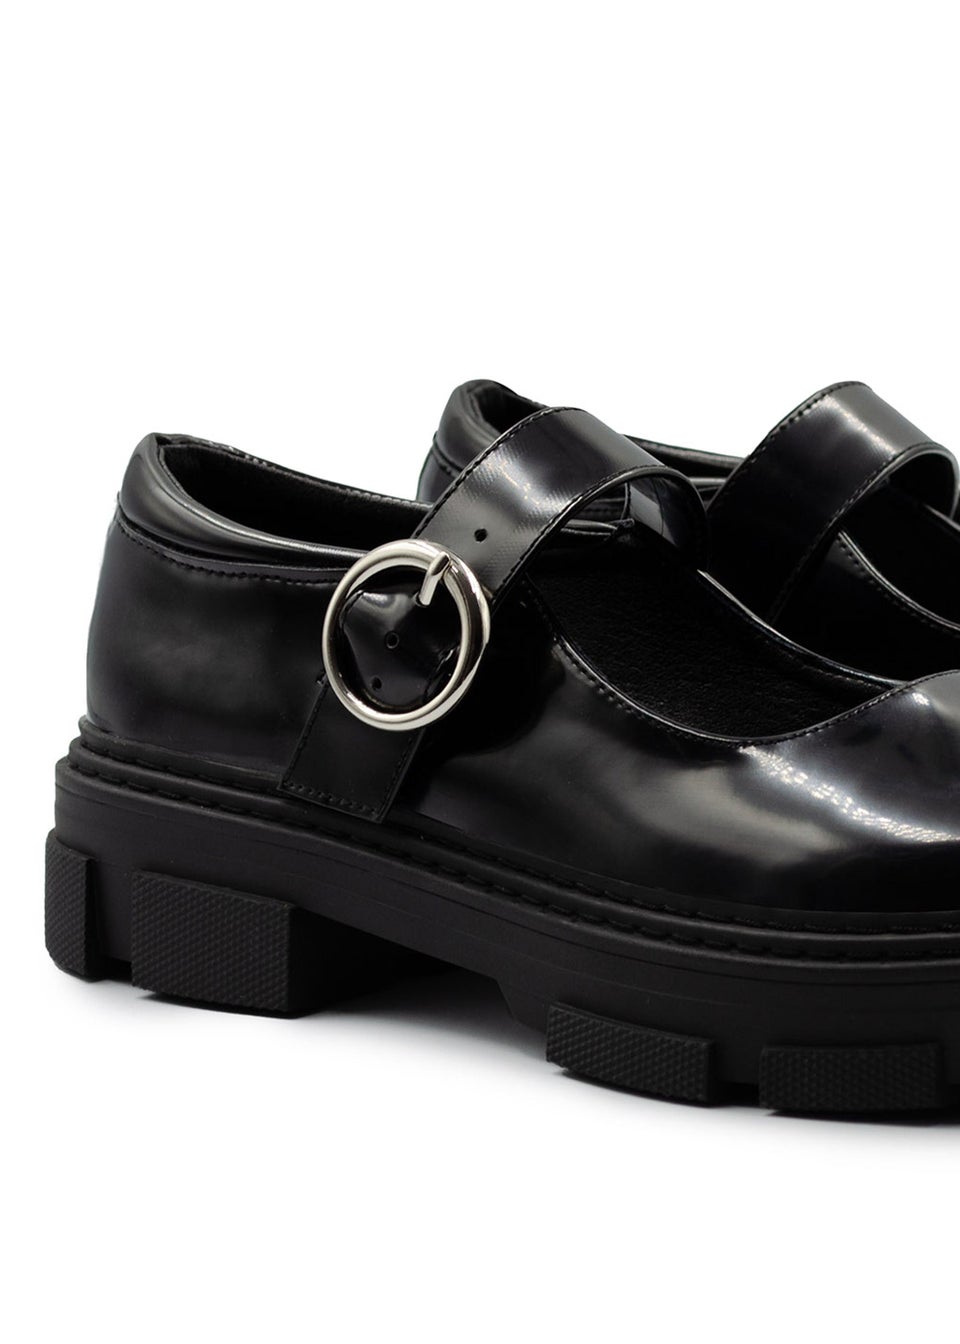 Where's That From Black Patent Skylar Chunky Sole Loafers